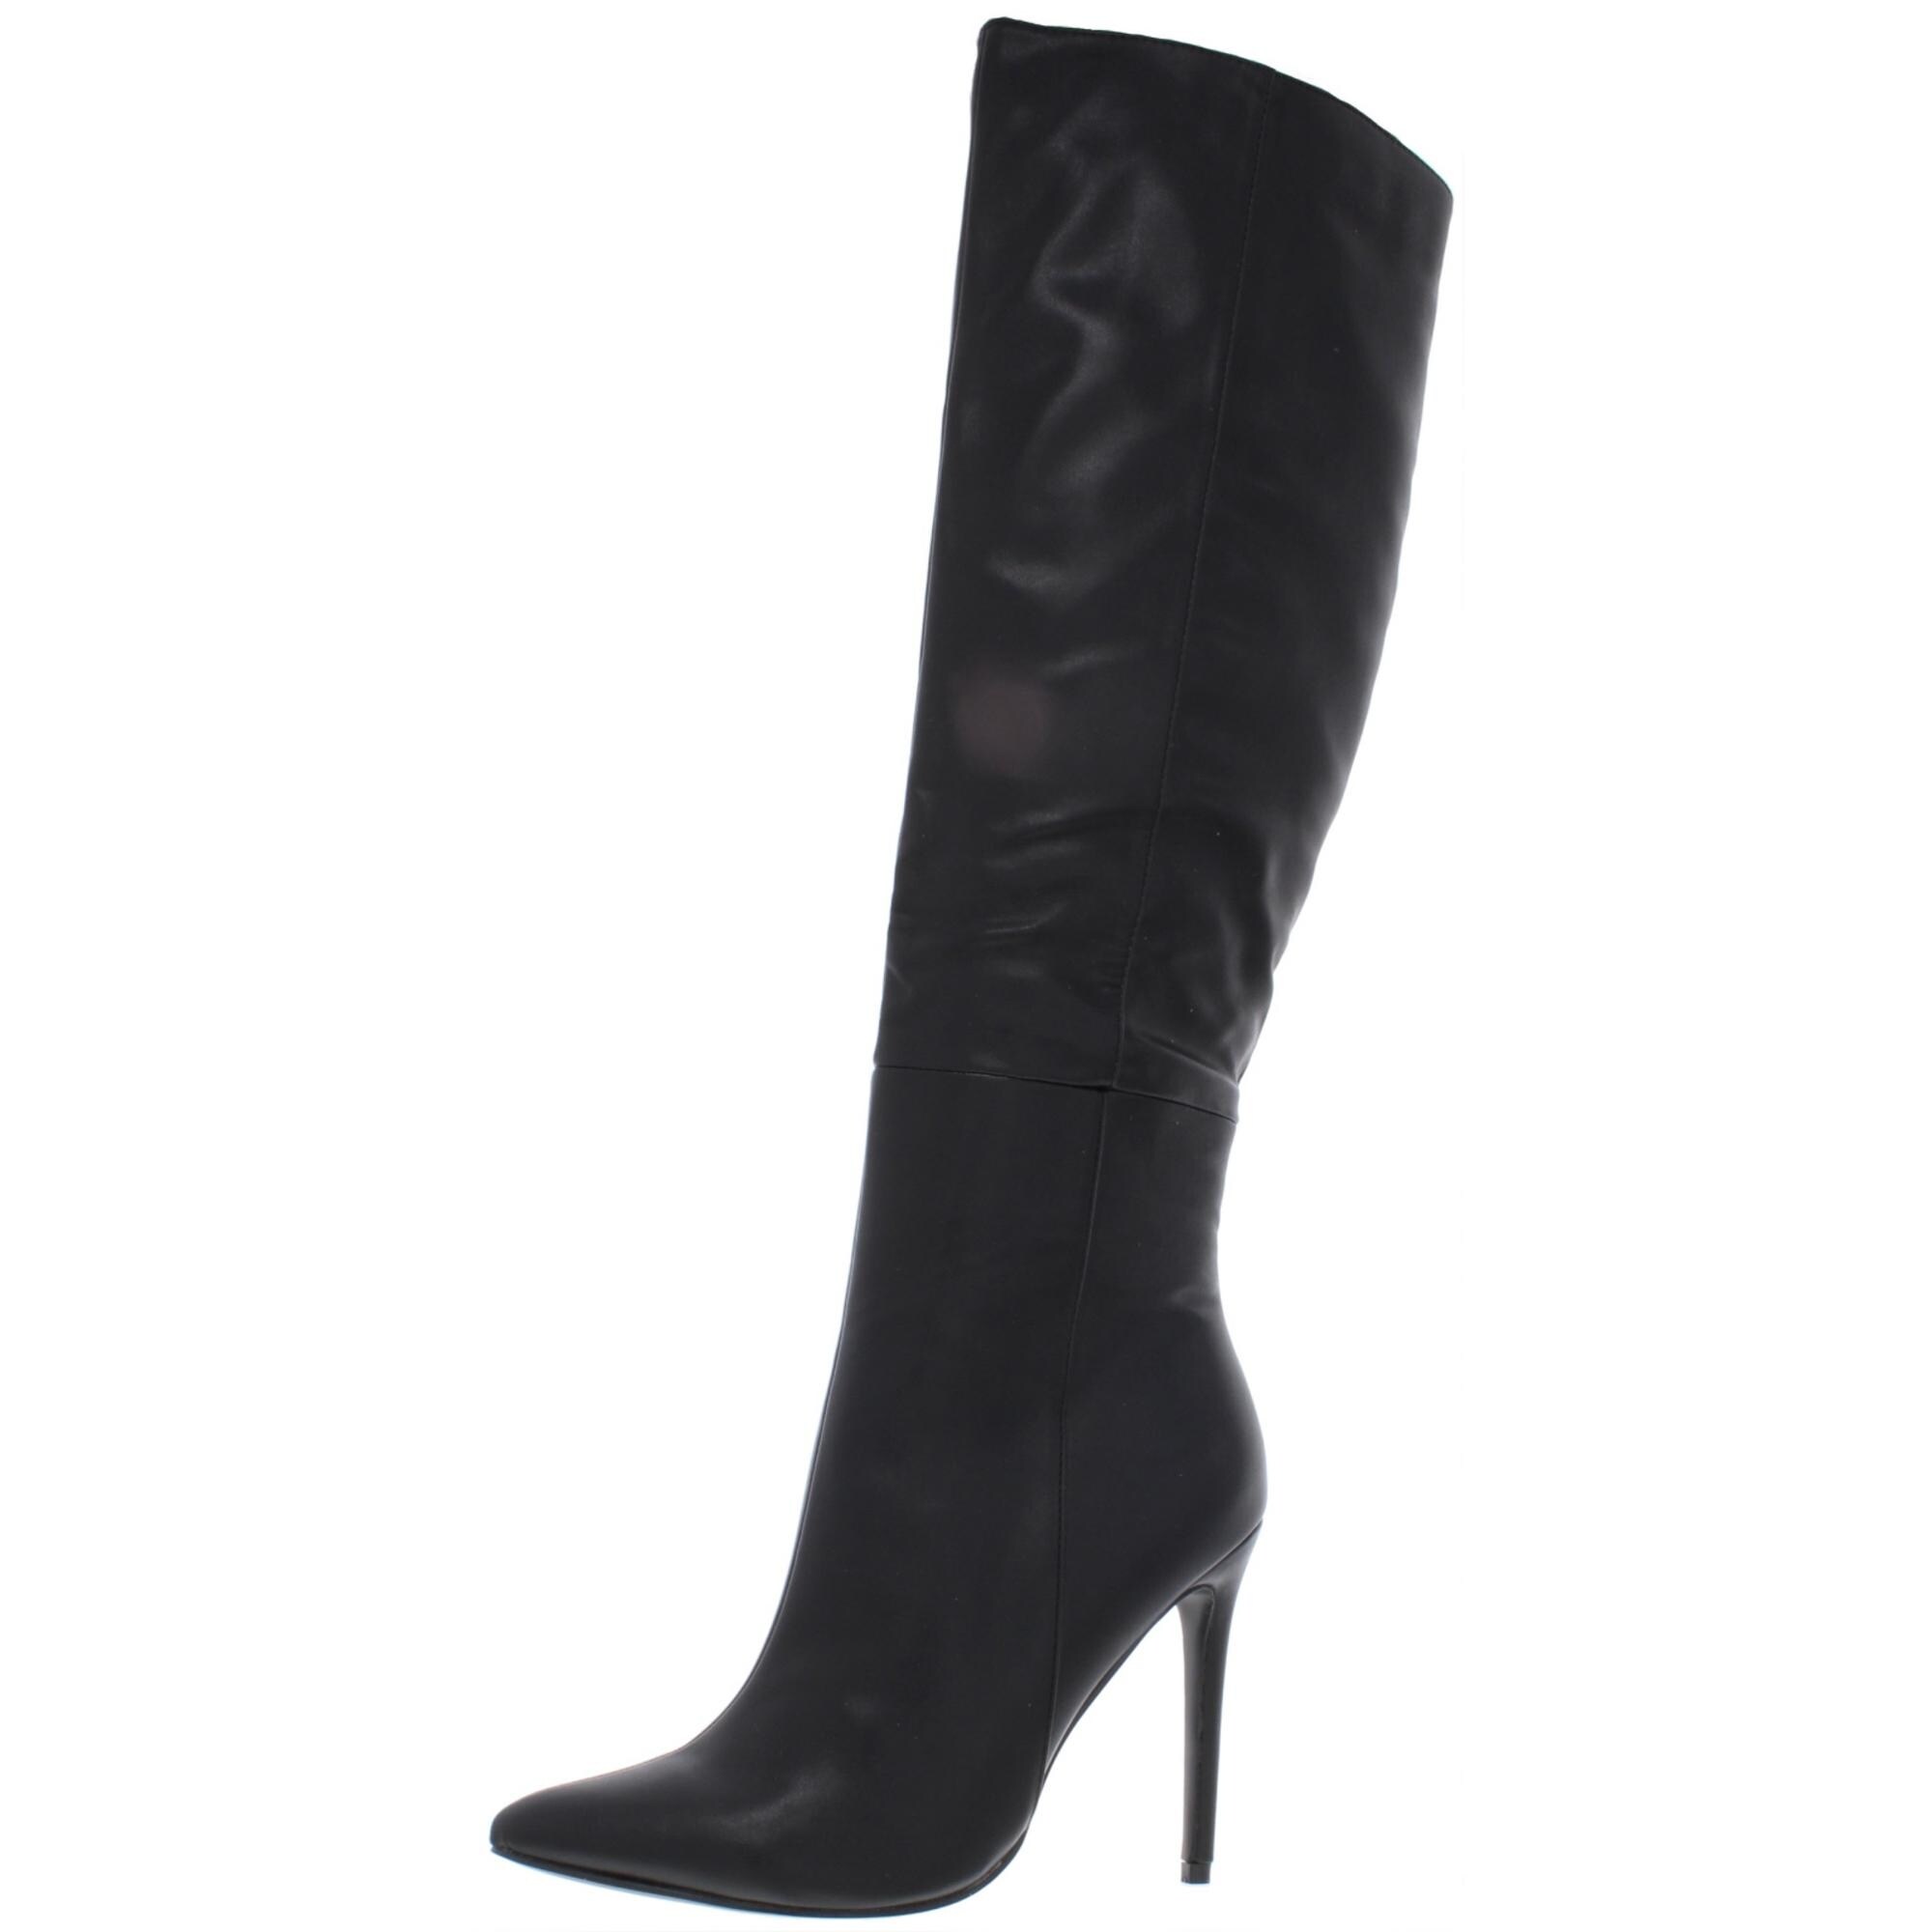 ladies black leather knee high boots size 6